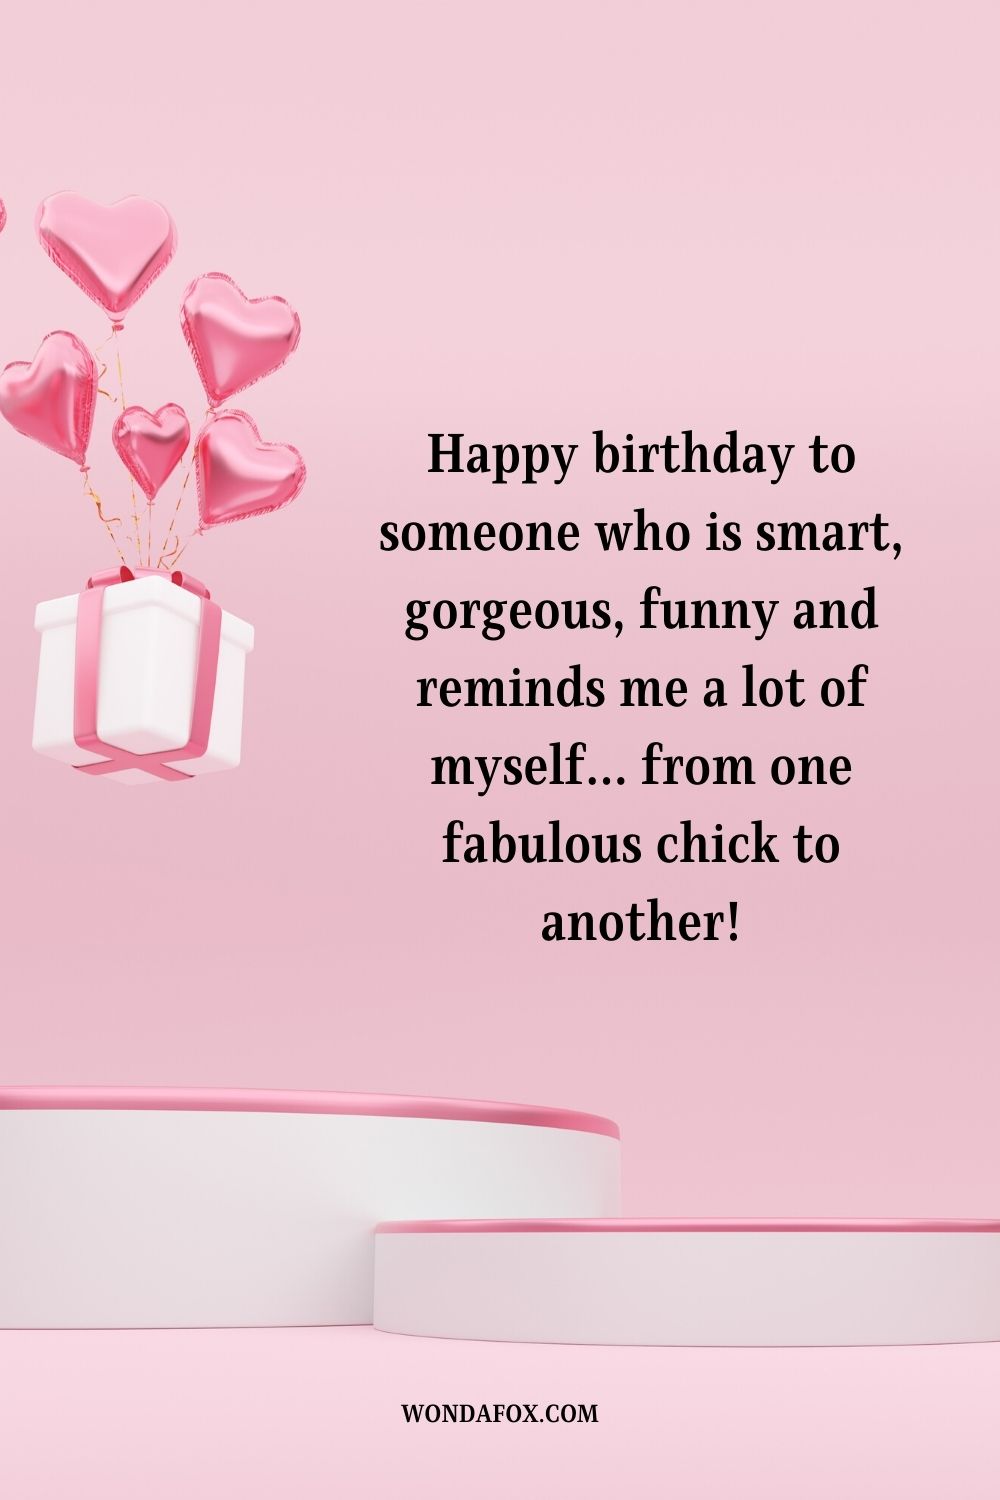 “Happy birthday to someone who is smart, gorgeous, funny and reminds me a lot of myself… from one fabulous chick to another!”